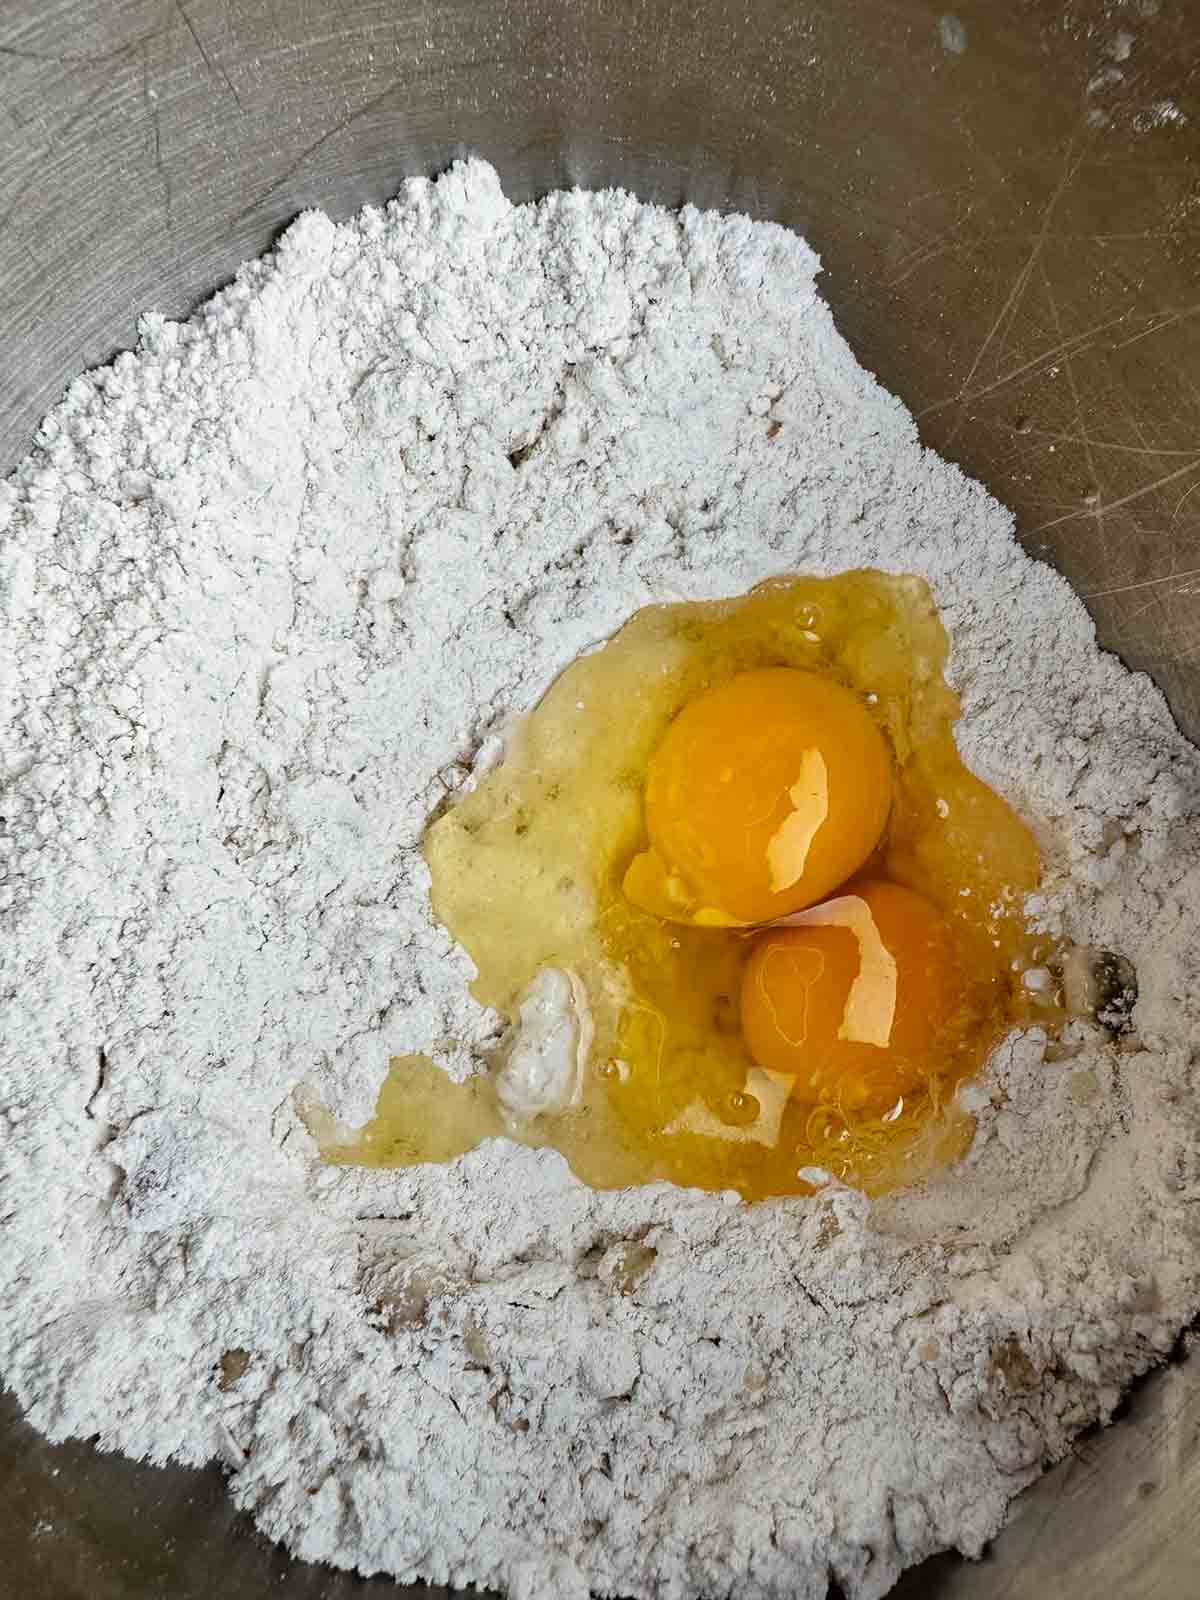 Add the eggs to the dry ingredients